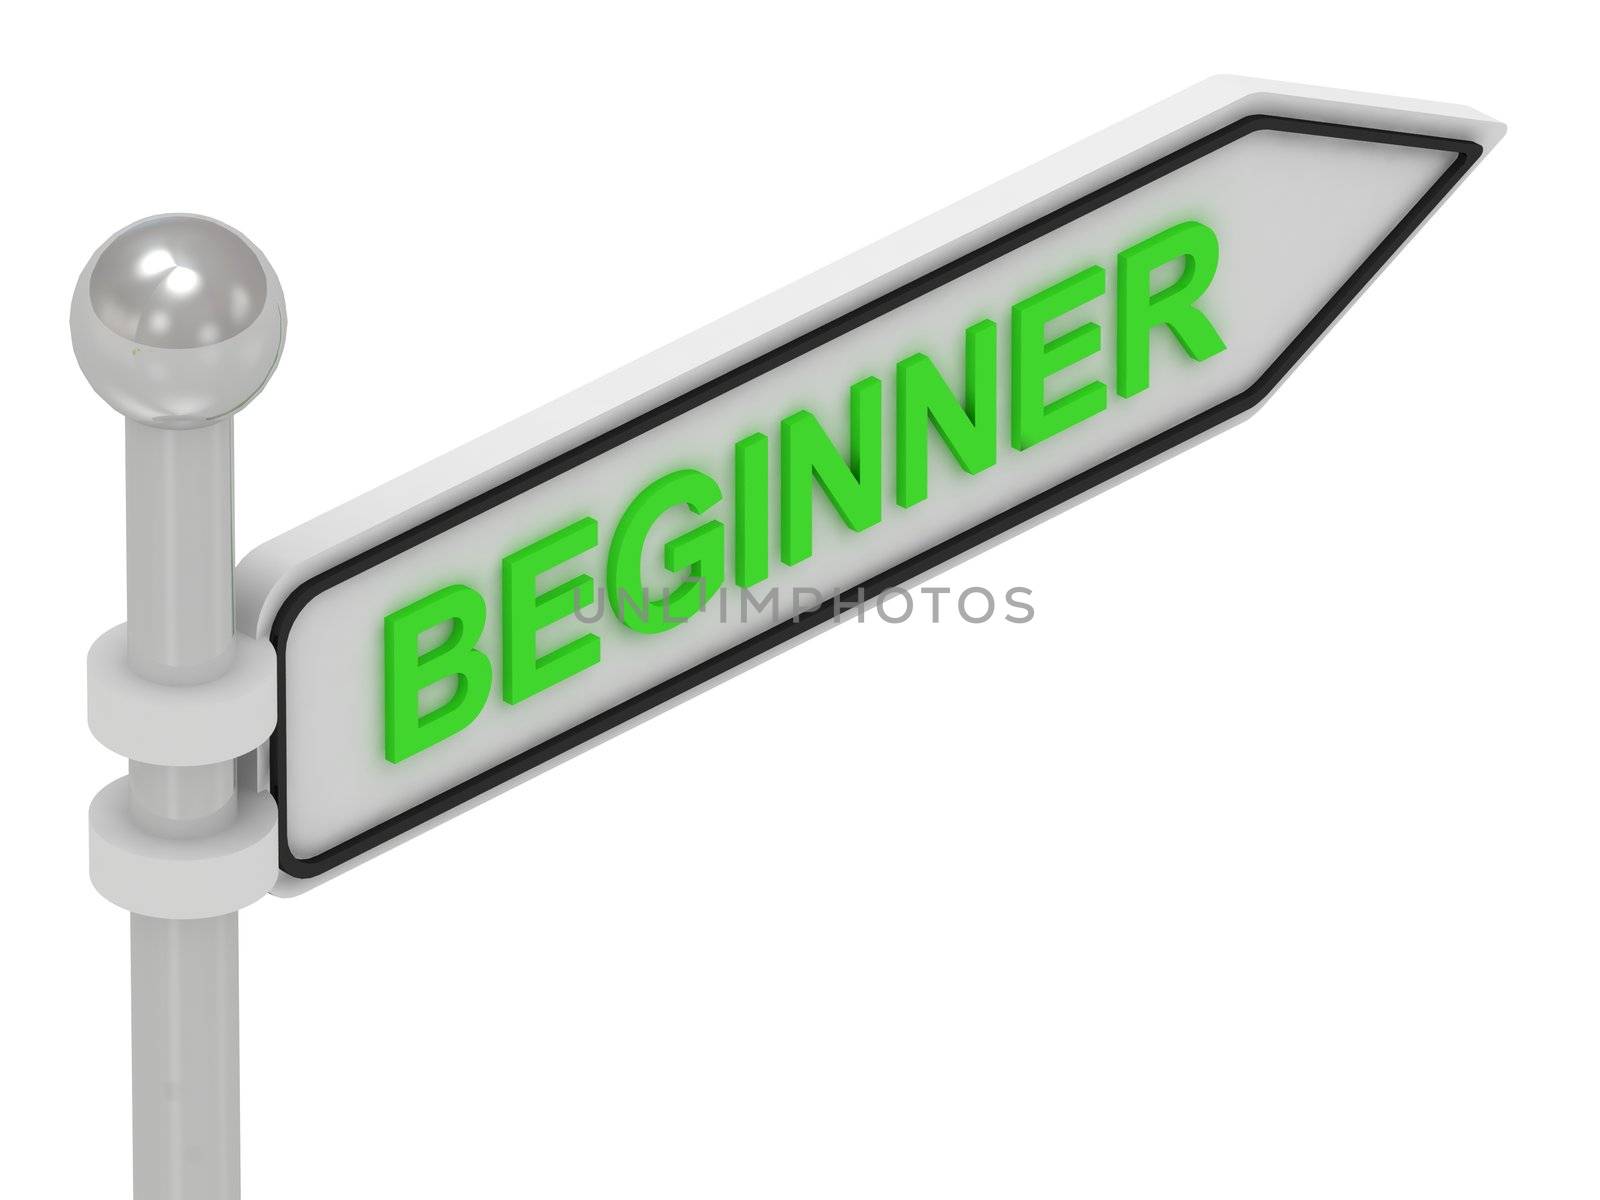 BEGINNER arrow sign with letters on isolated white background